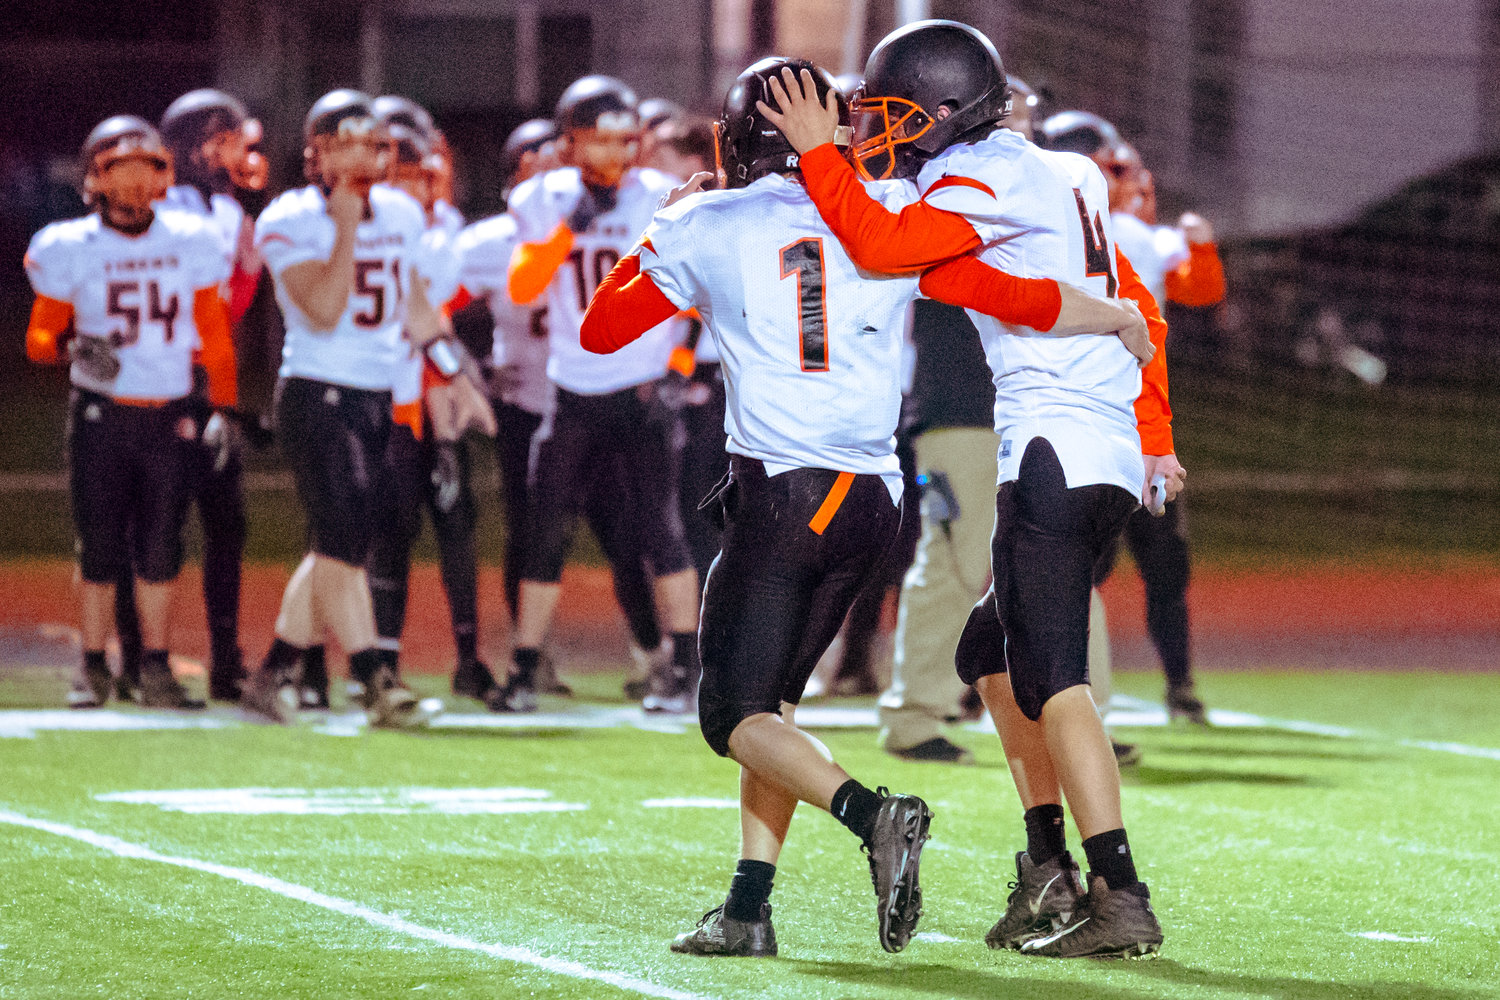 Tigers embrace following a play during a game against Onalaska Saturday night at Tiger Stadium.